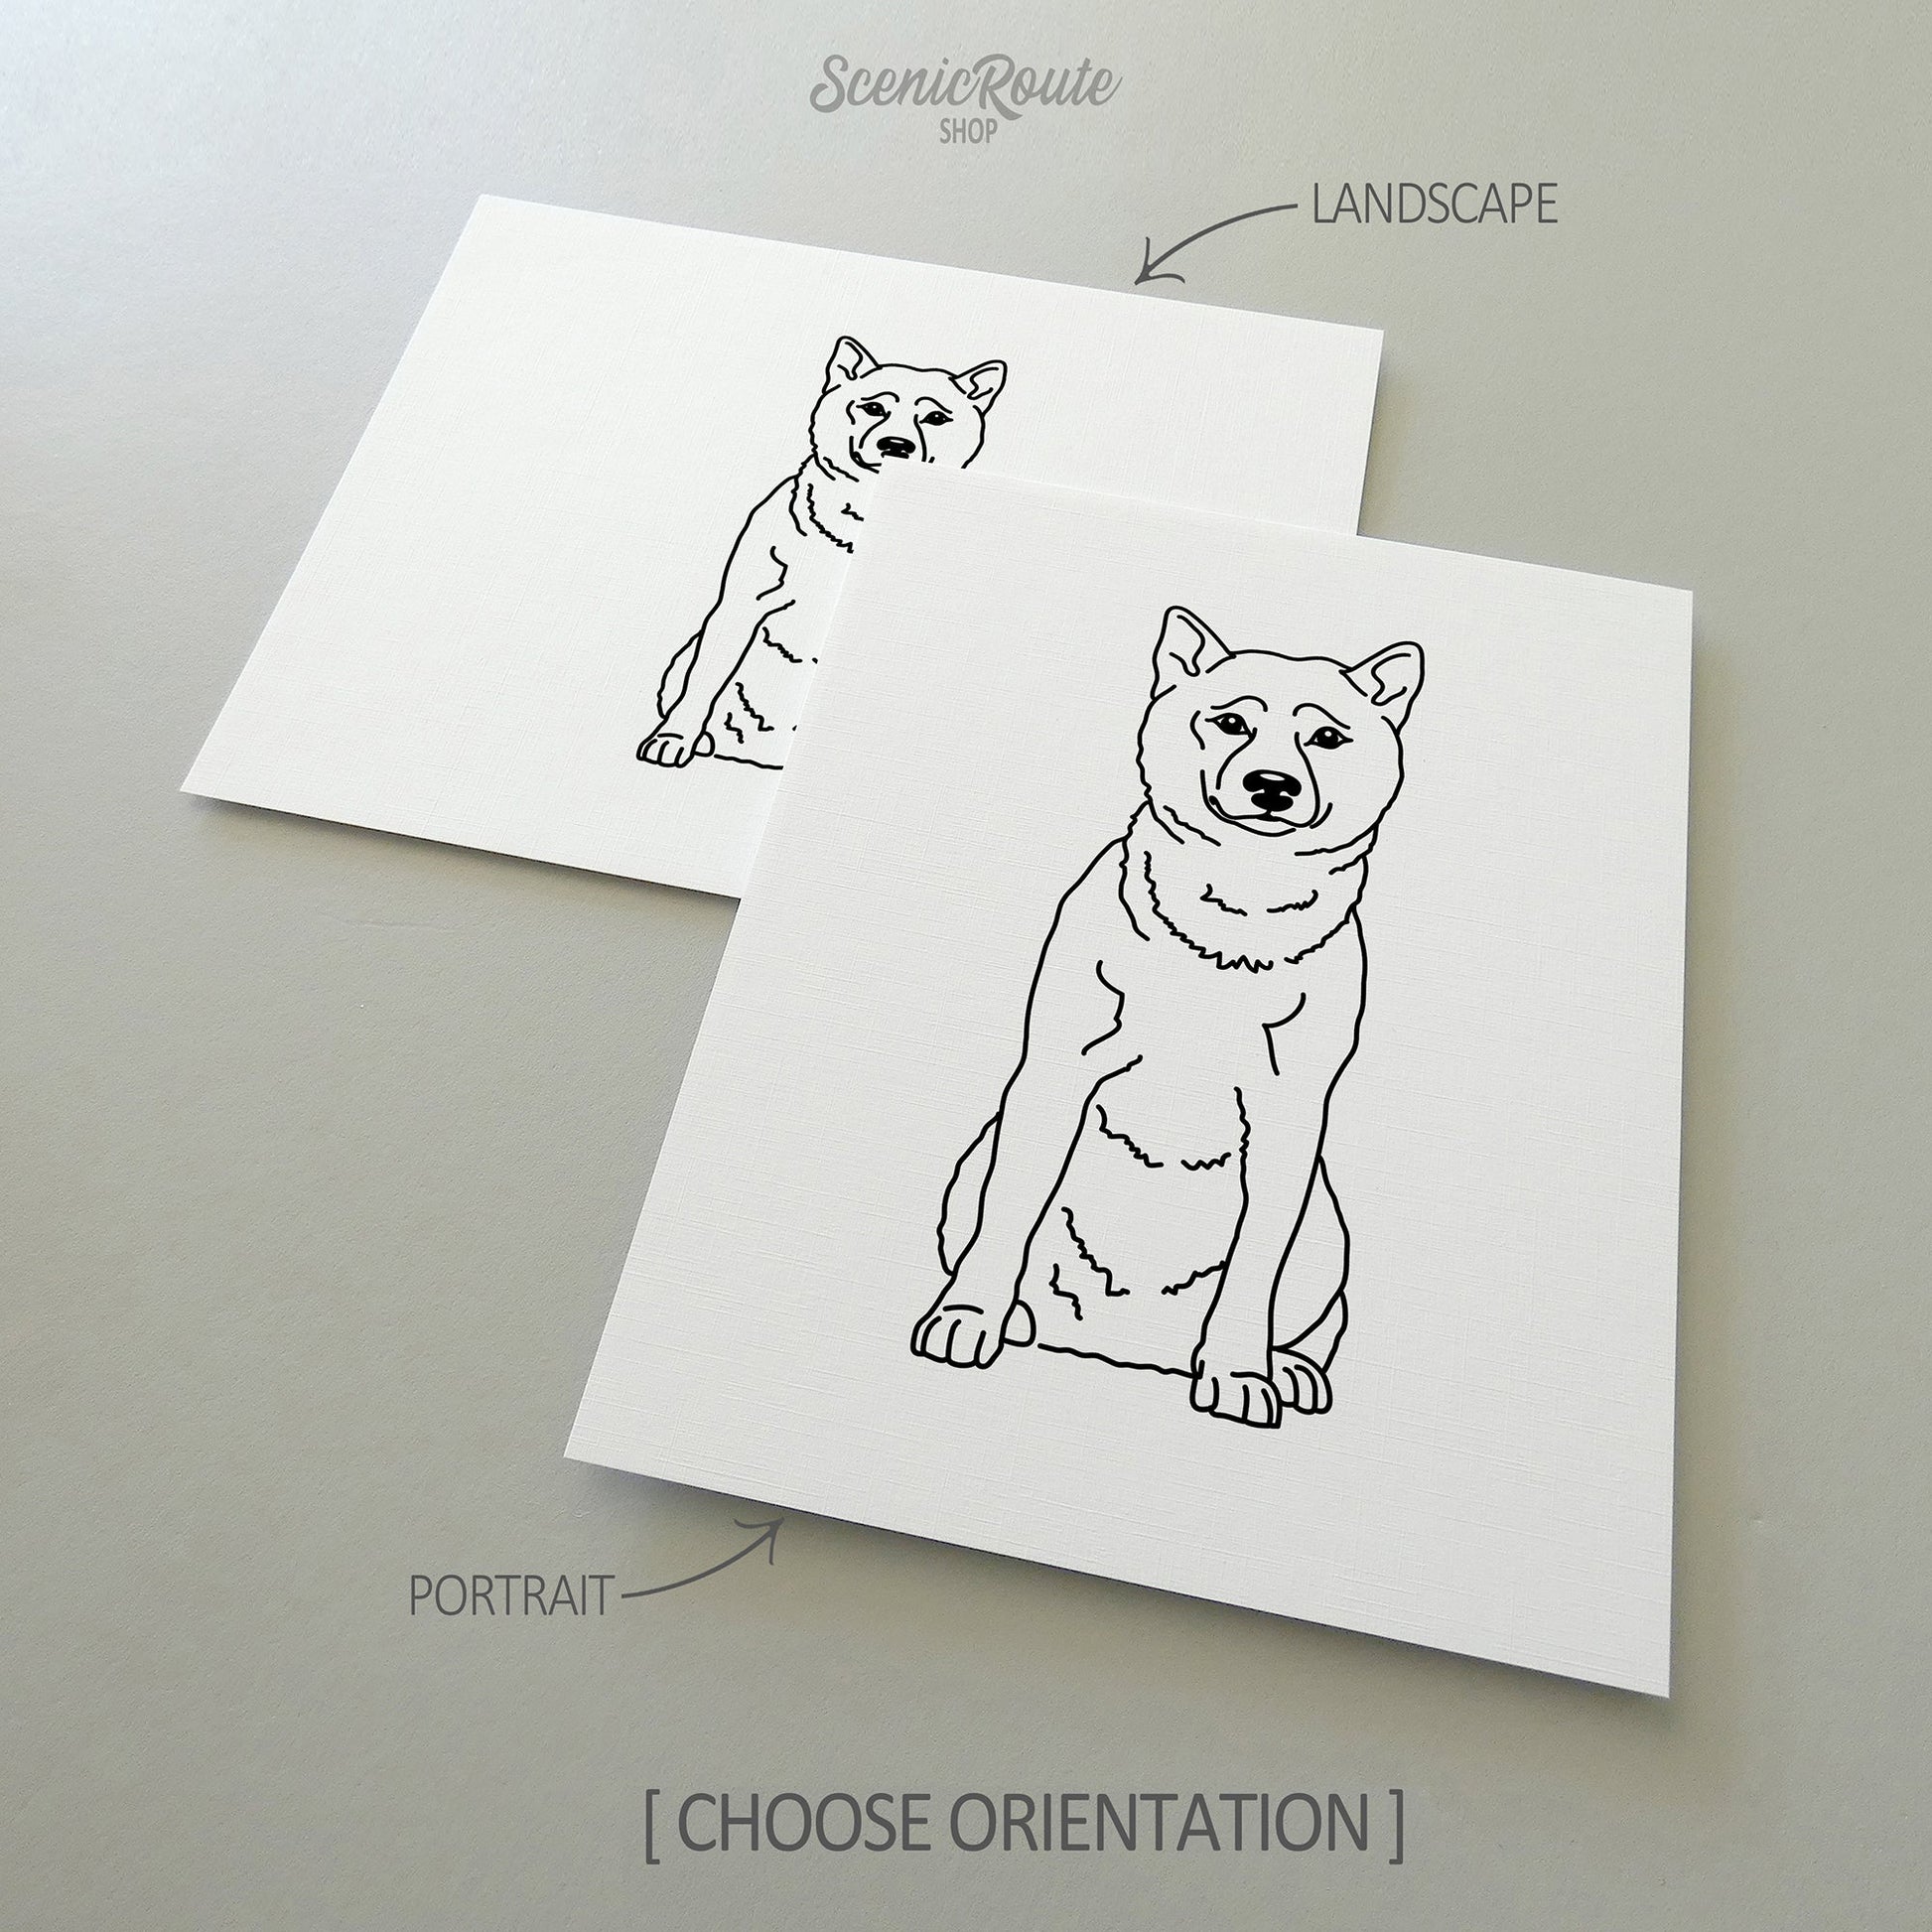 Two line art drawings of a Shiba Inu dog on white linen paper with a gray background.  The pieces are shown in portrait and landscape orientation for the available art print options.